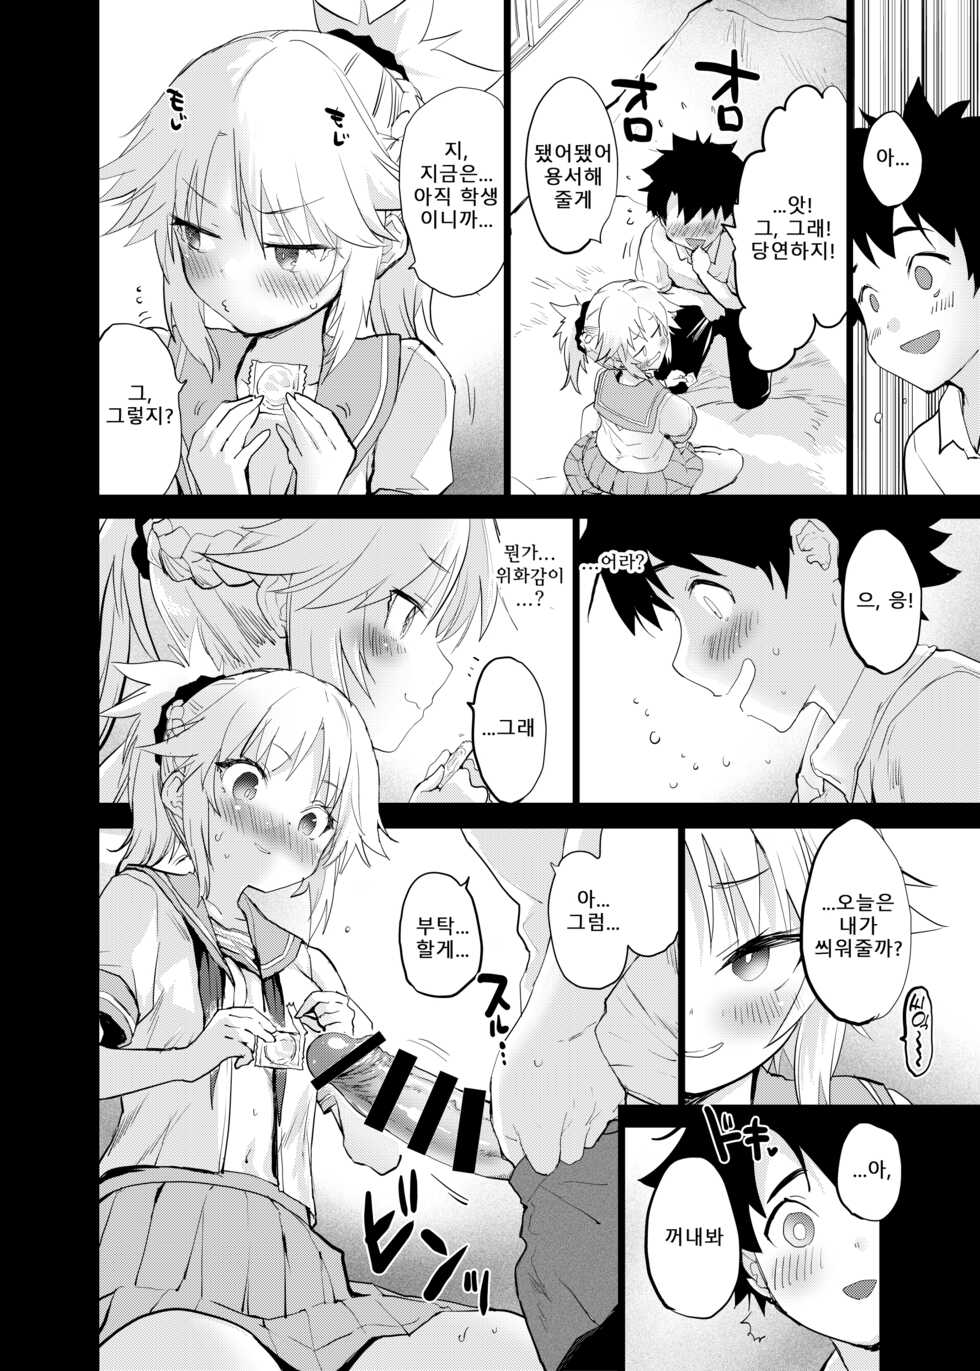 [Peθ (Mozu)] ApocryFucking' School Life Collabo Event <ROUTE: MORDRED> | ApocryFucking' 스쿨 라이프 콜라보 이벤트 <ROUTE: MORDRED> (Fate/Grand Order) [Korean] [Digital] - Page 10